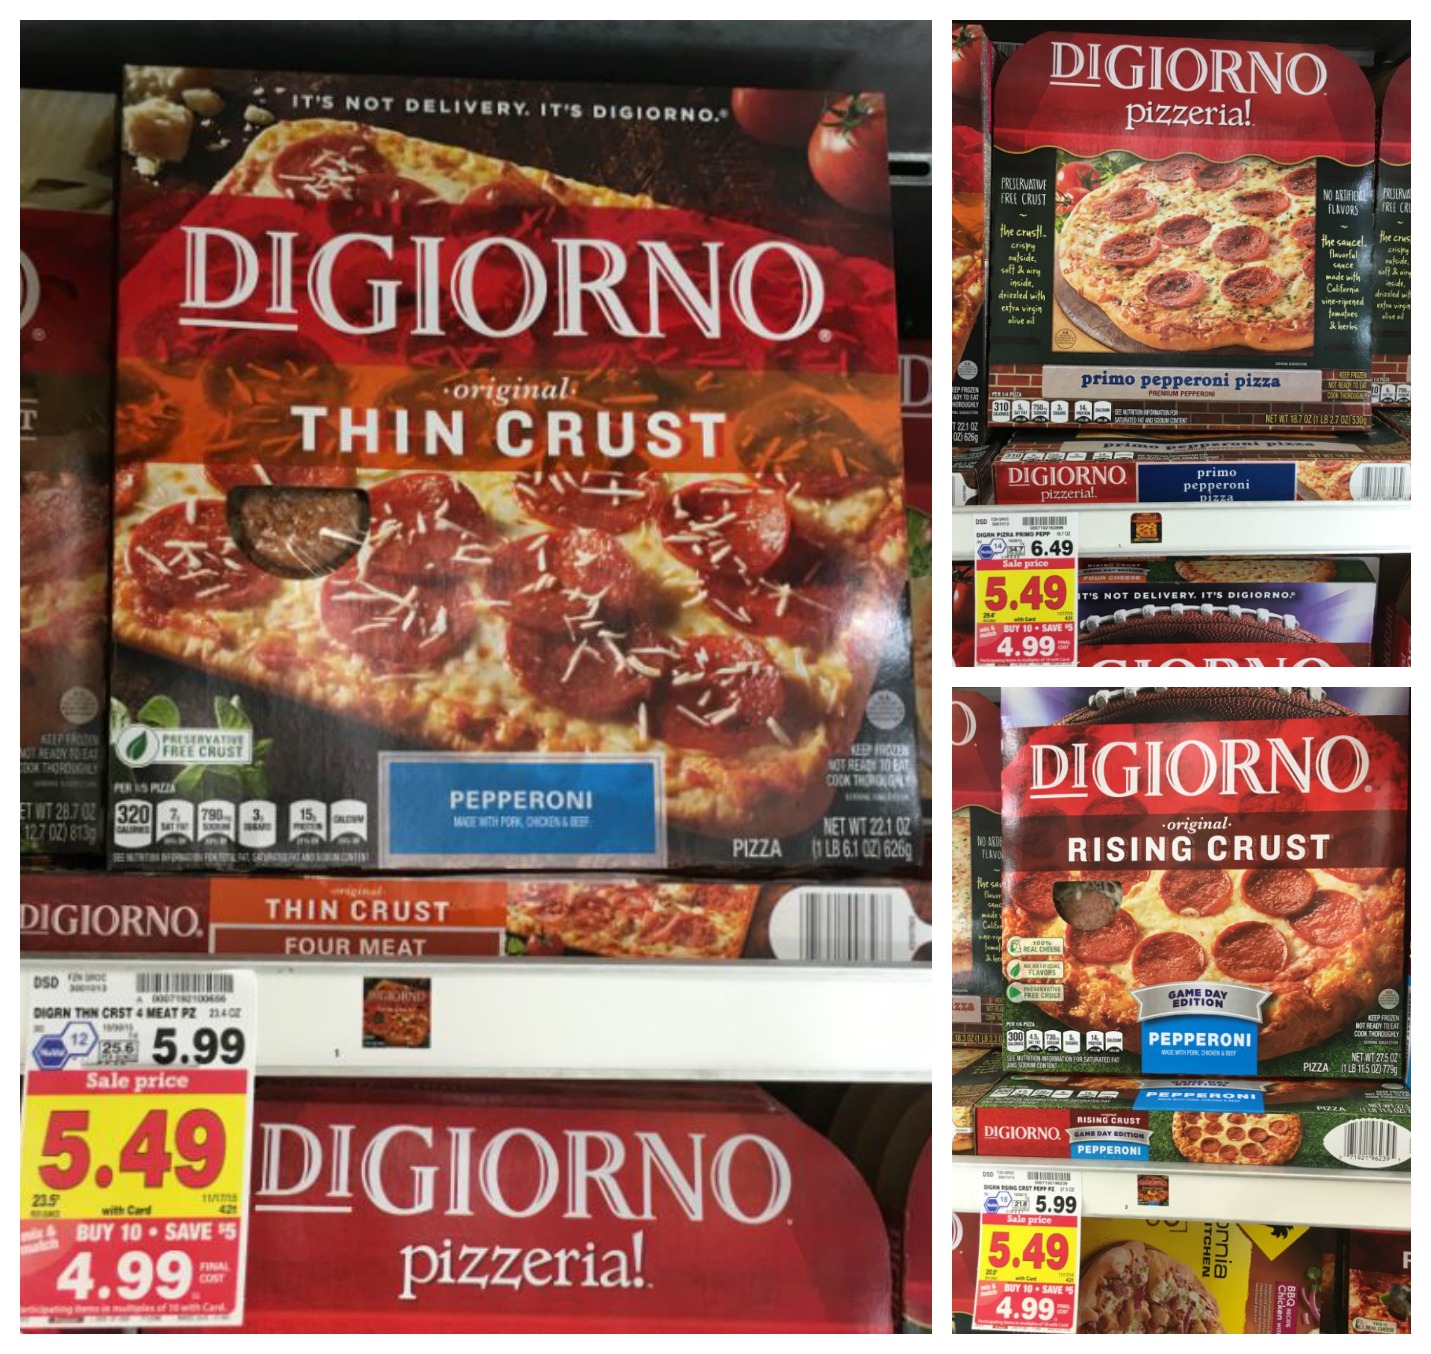 new-digiorno-coupon-pizzas-for-3-32-with-kroger-mega-sale-kroger